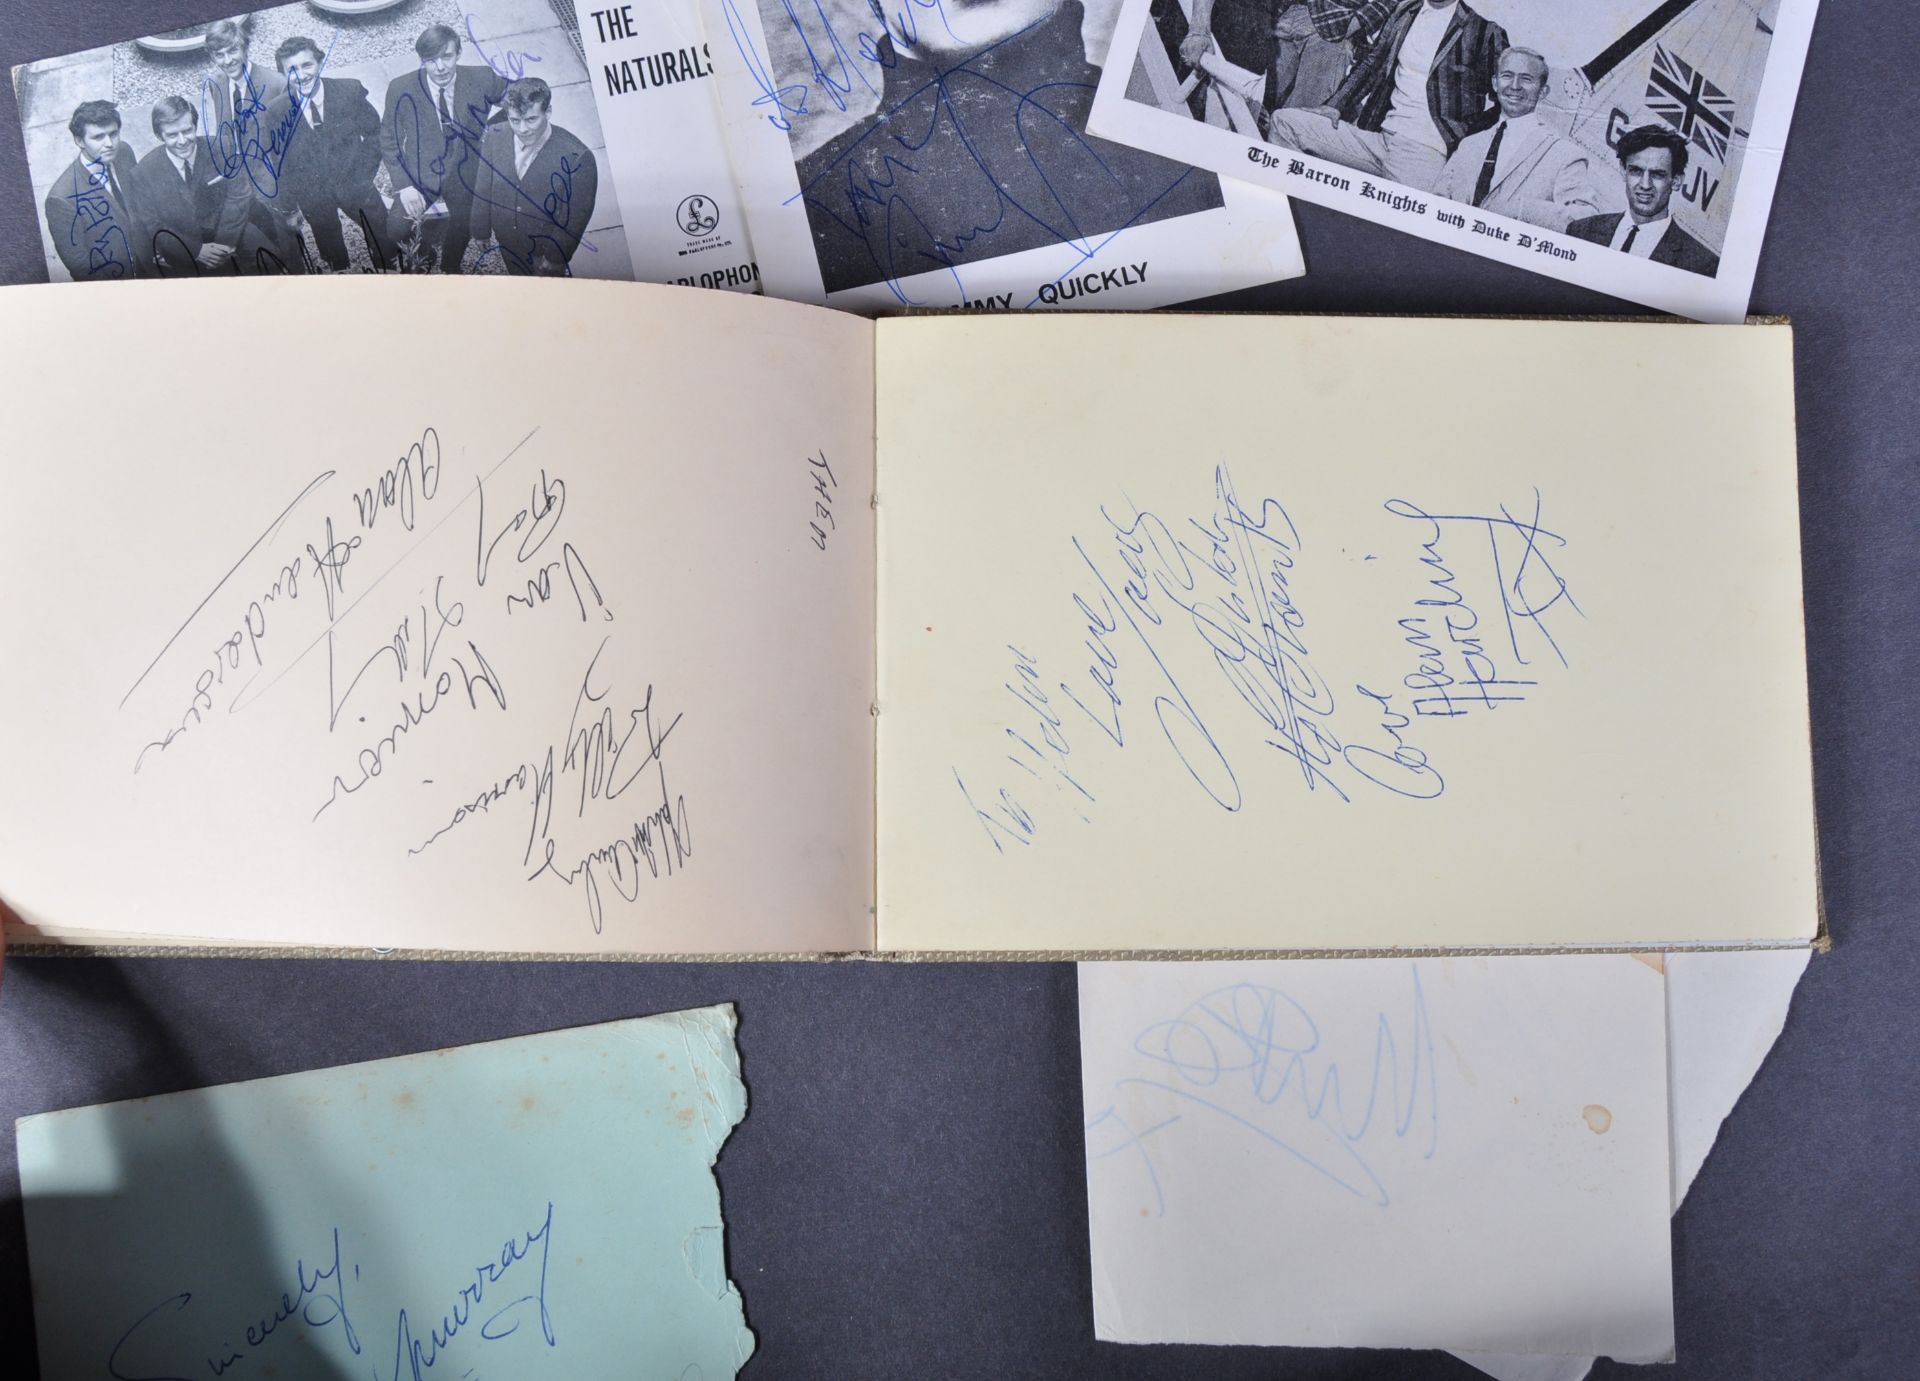 1960S MUSIC AUTOGRAPH ALBUMS - OBTAINED FROM DISCS-A-GOGO - Image 29 of 31